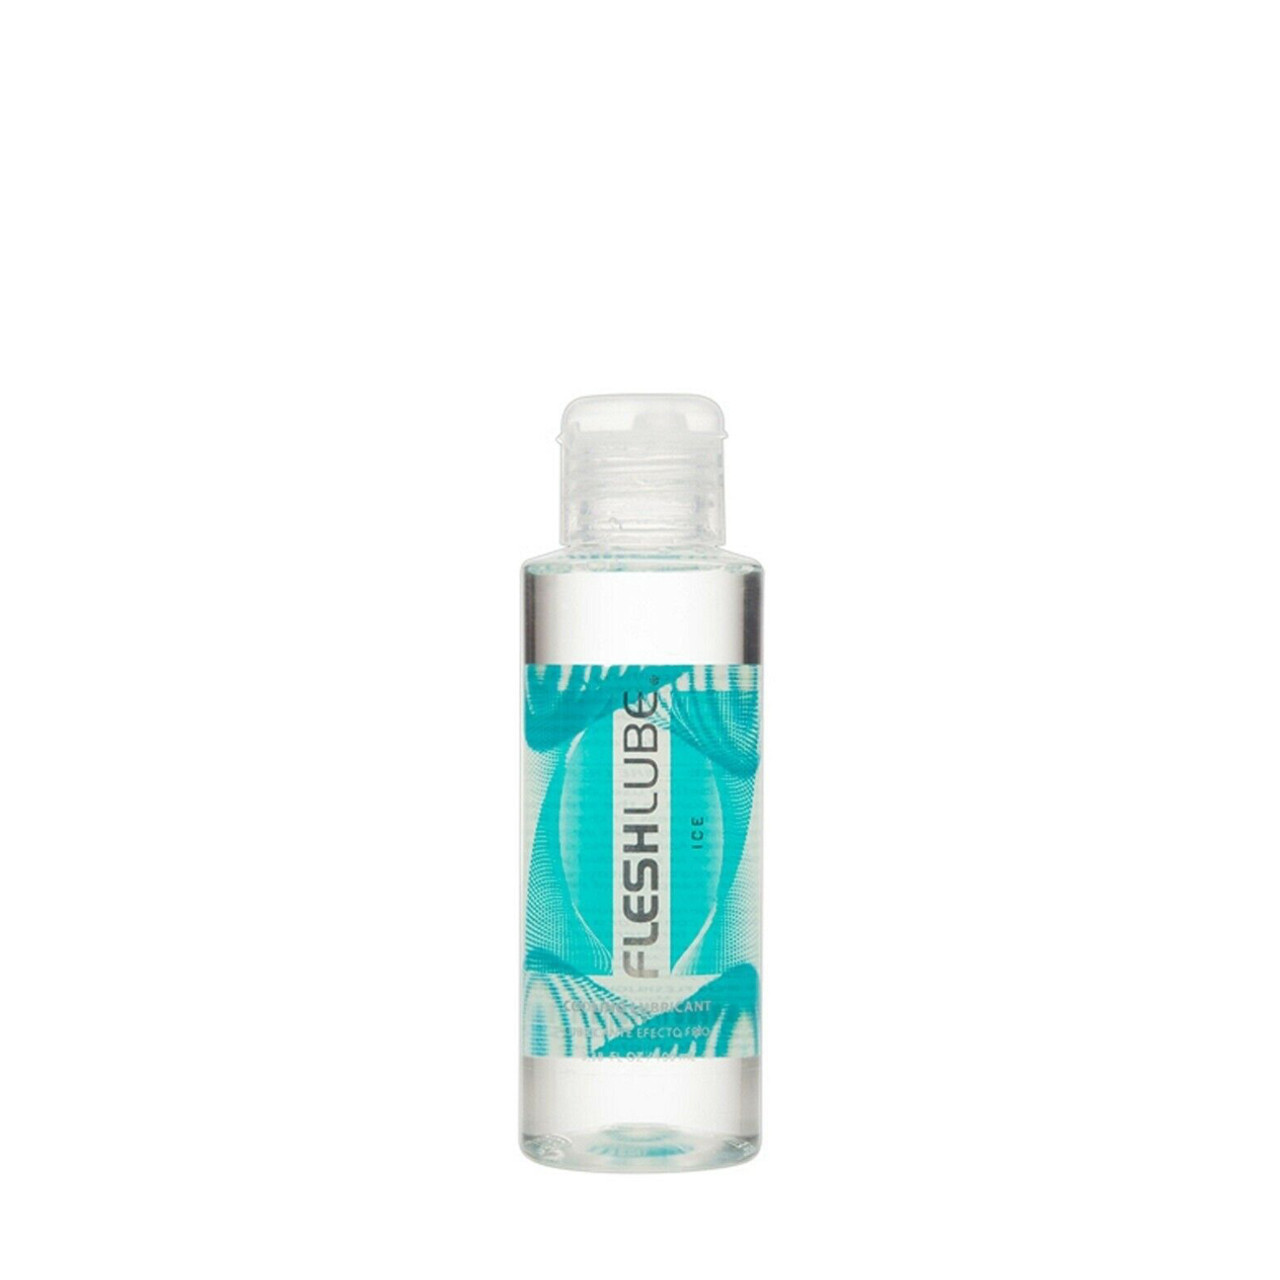 Buy the Fleshlube Ice Water-based Cooling Lubricant Paraben-free USA made  in 4 oz or